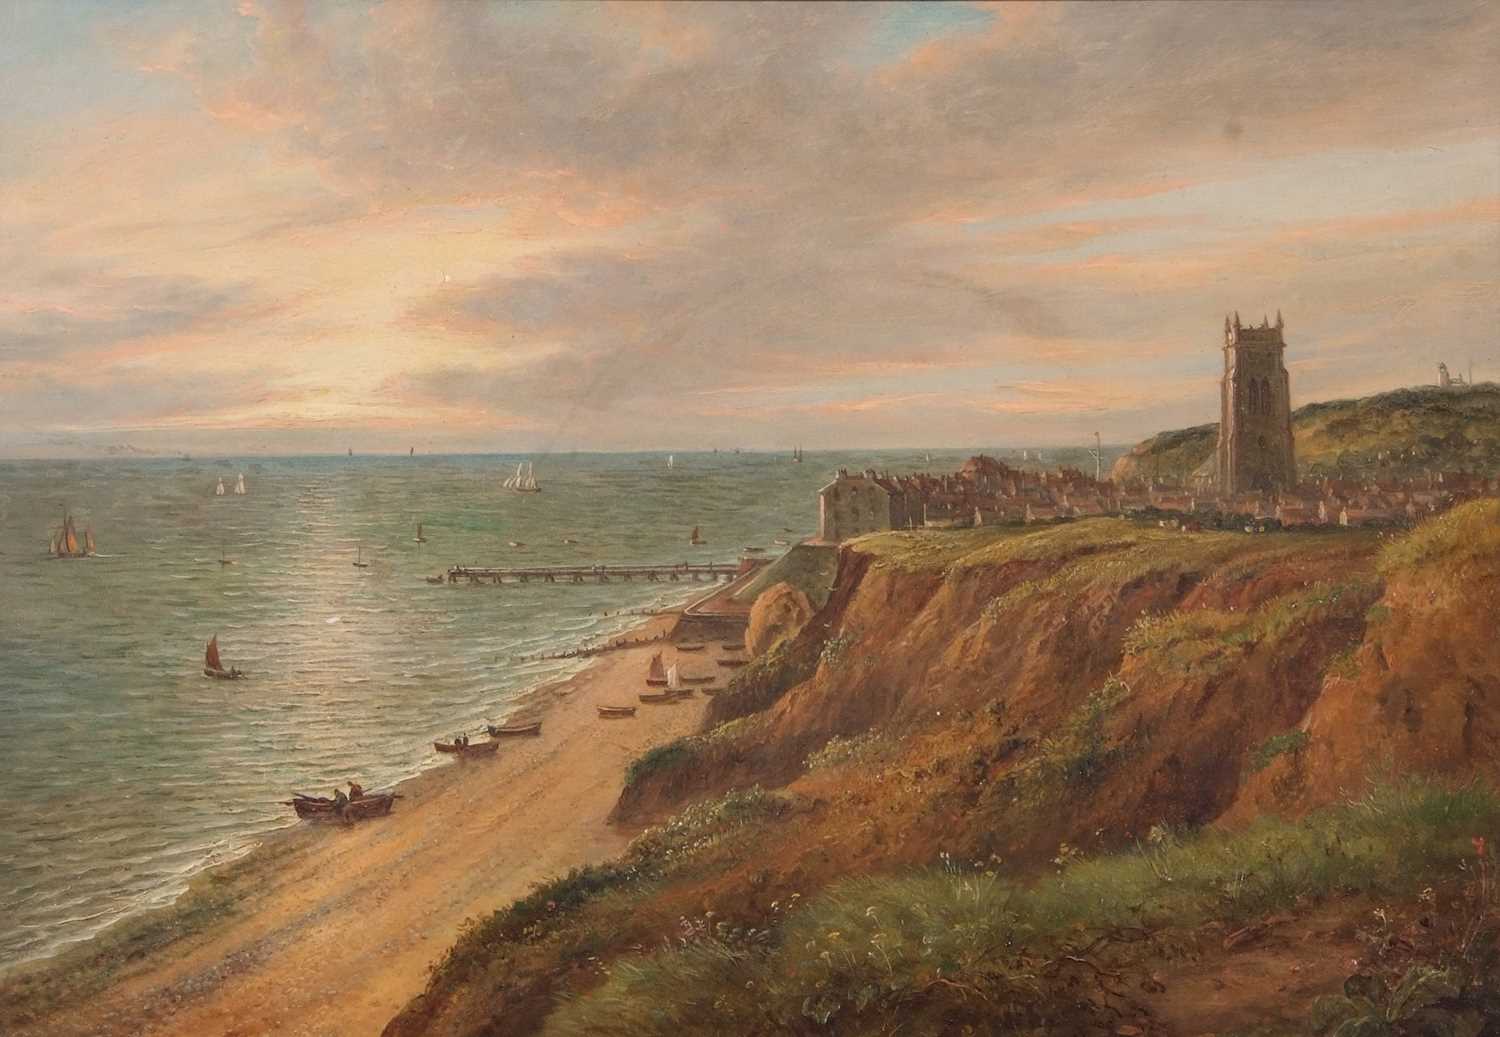 John Moore of Ipswich (1820-1902), "Cromer", oil on board, signed, 13x19ins, framed. - Image 2 of 2